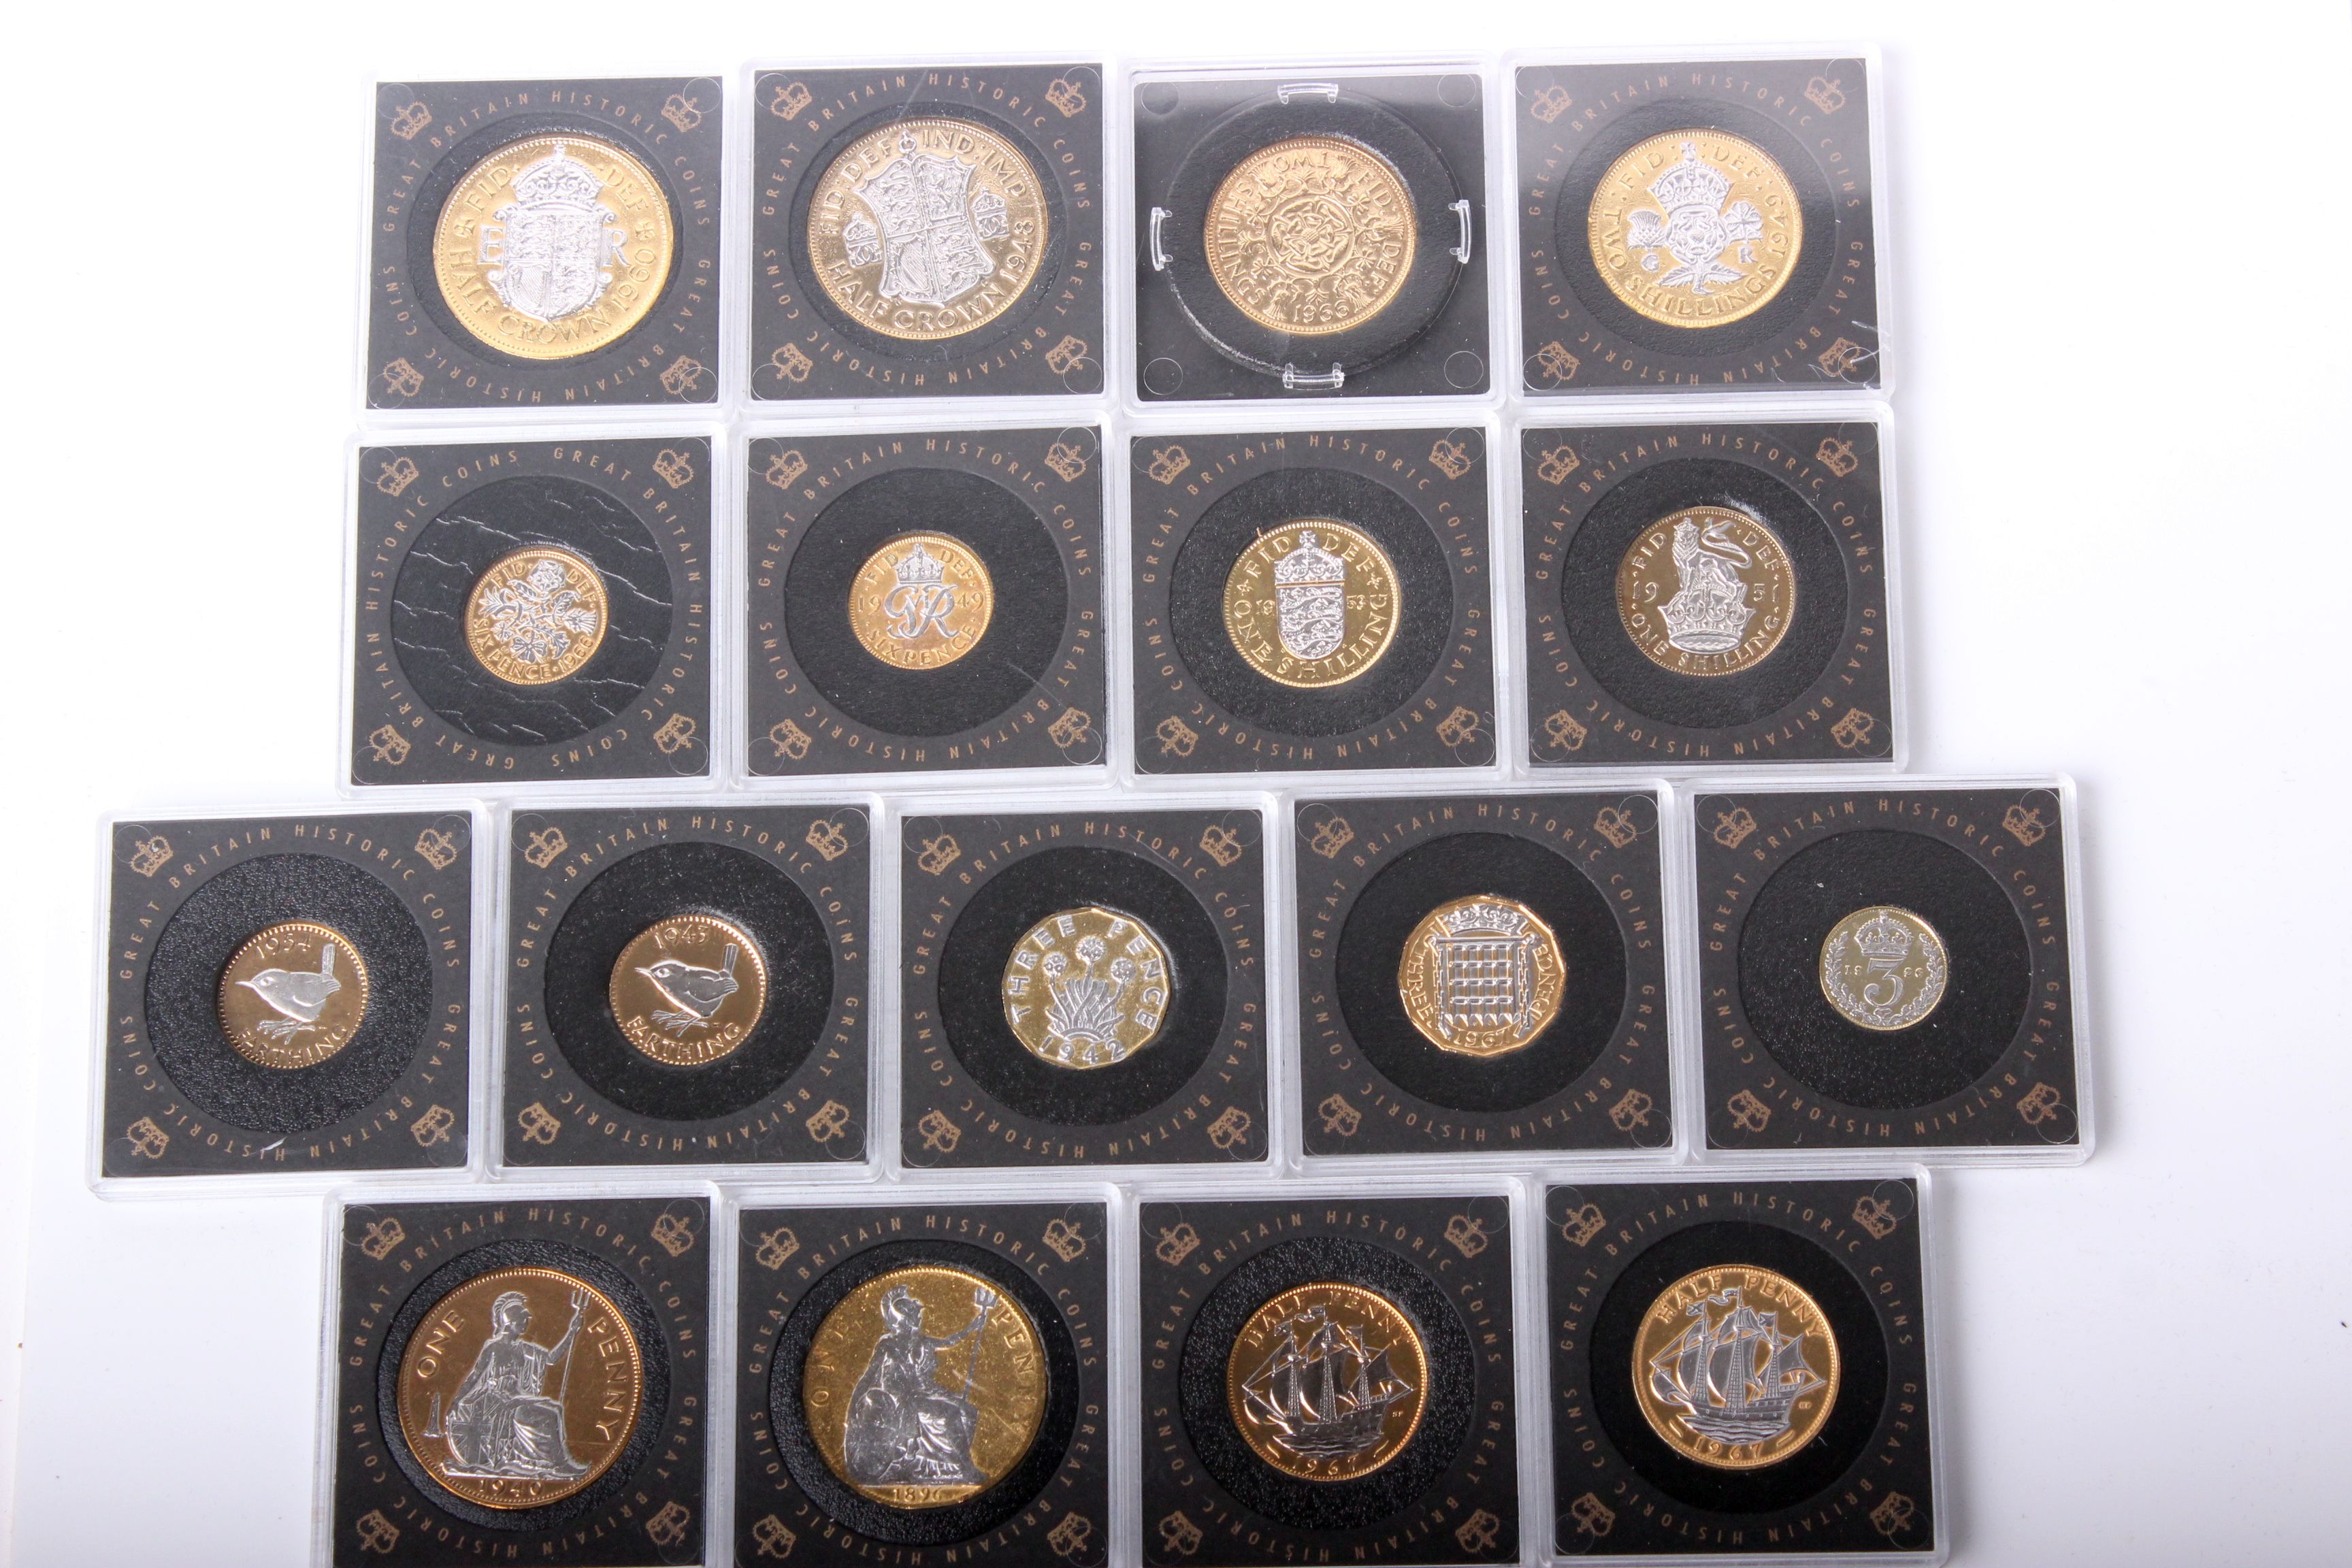 Westminster 'The Historic Coins of Great Britain', seventeen encapsulated coins all with